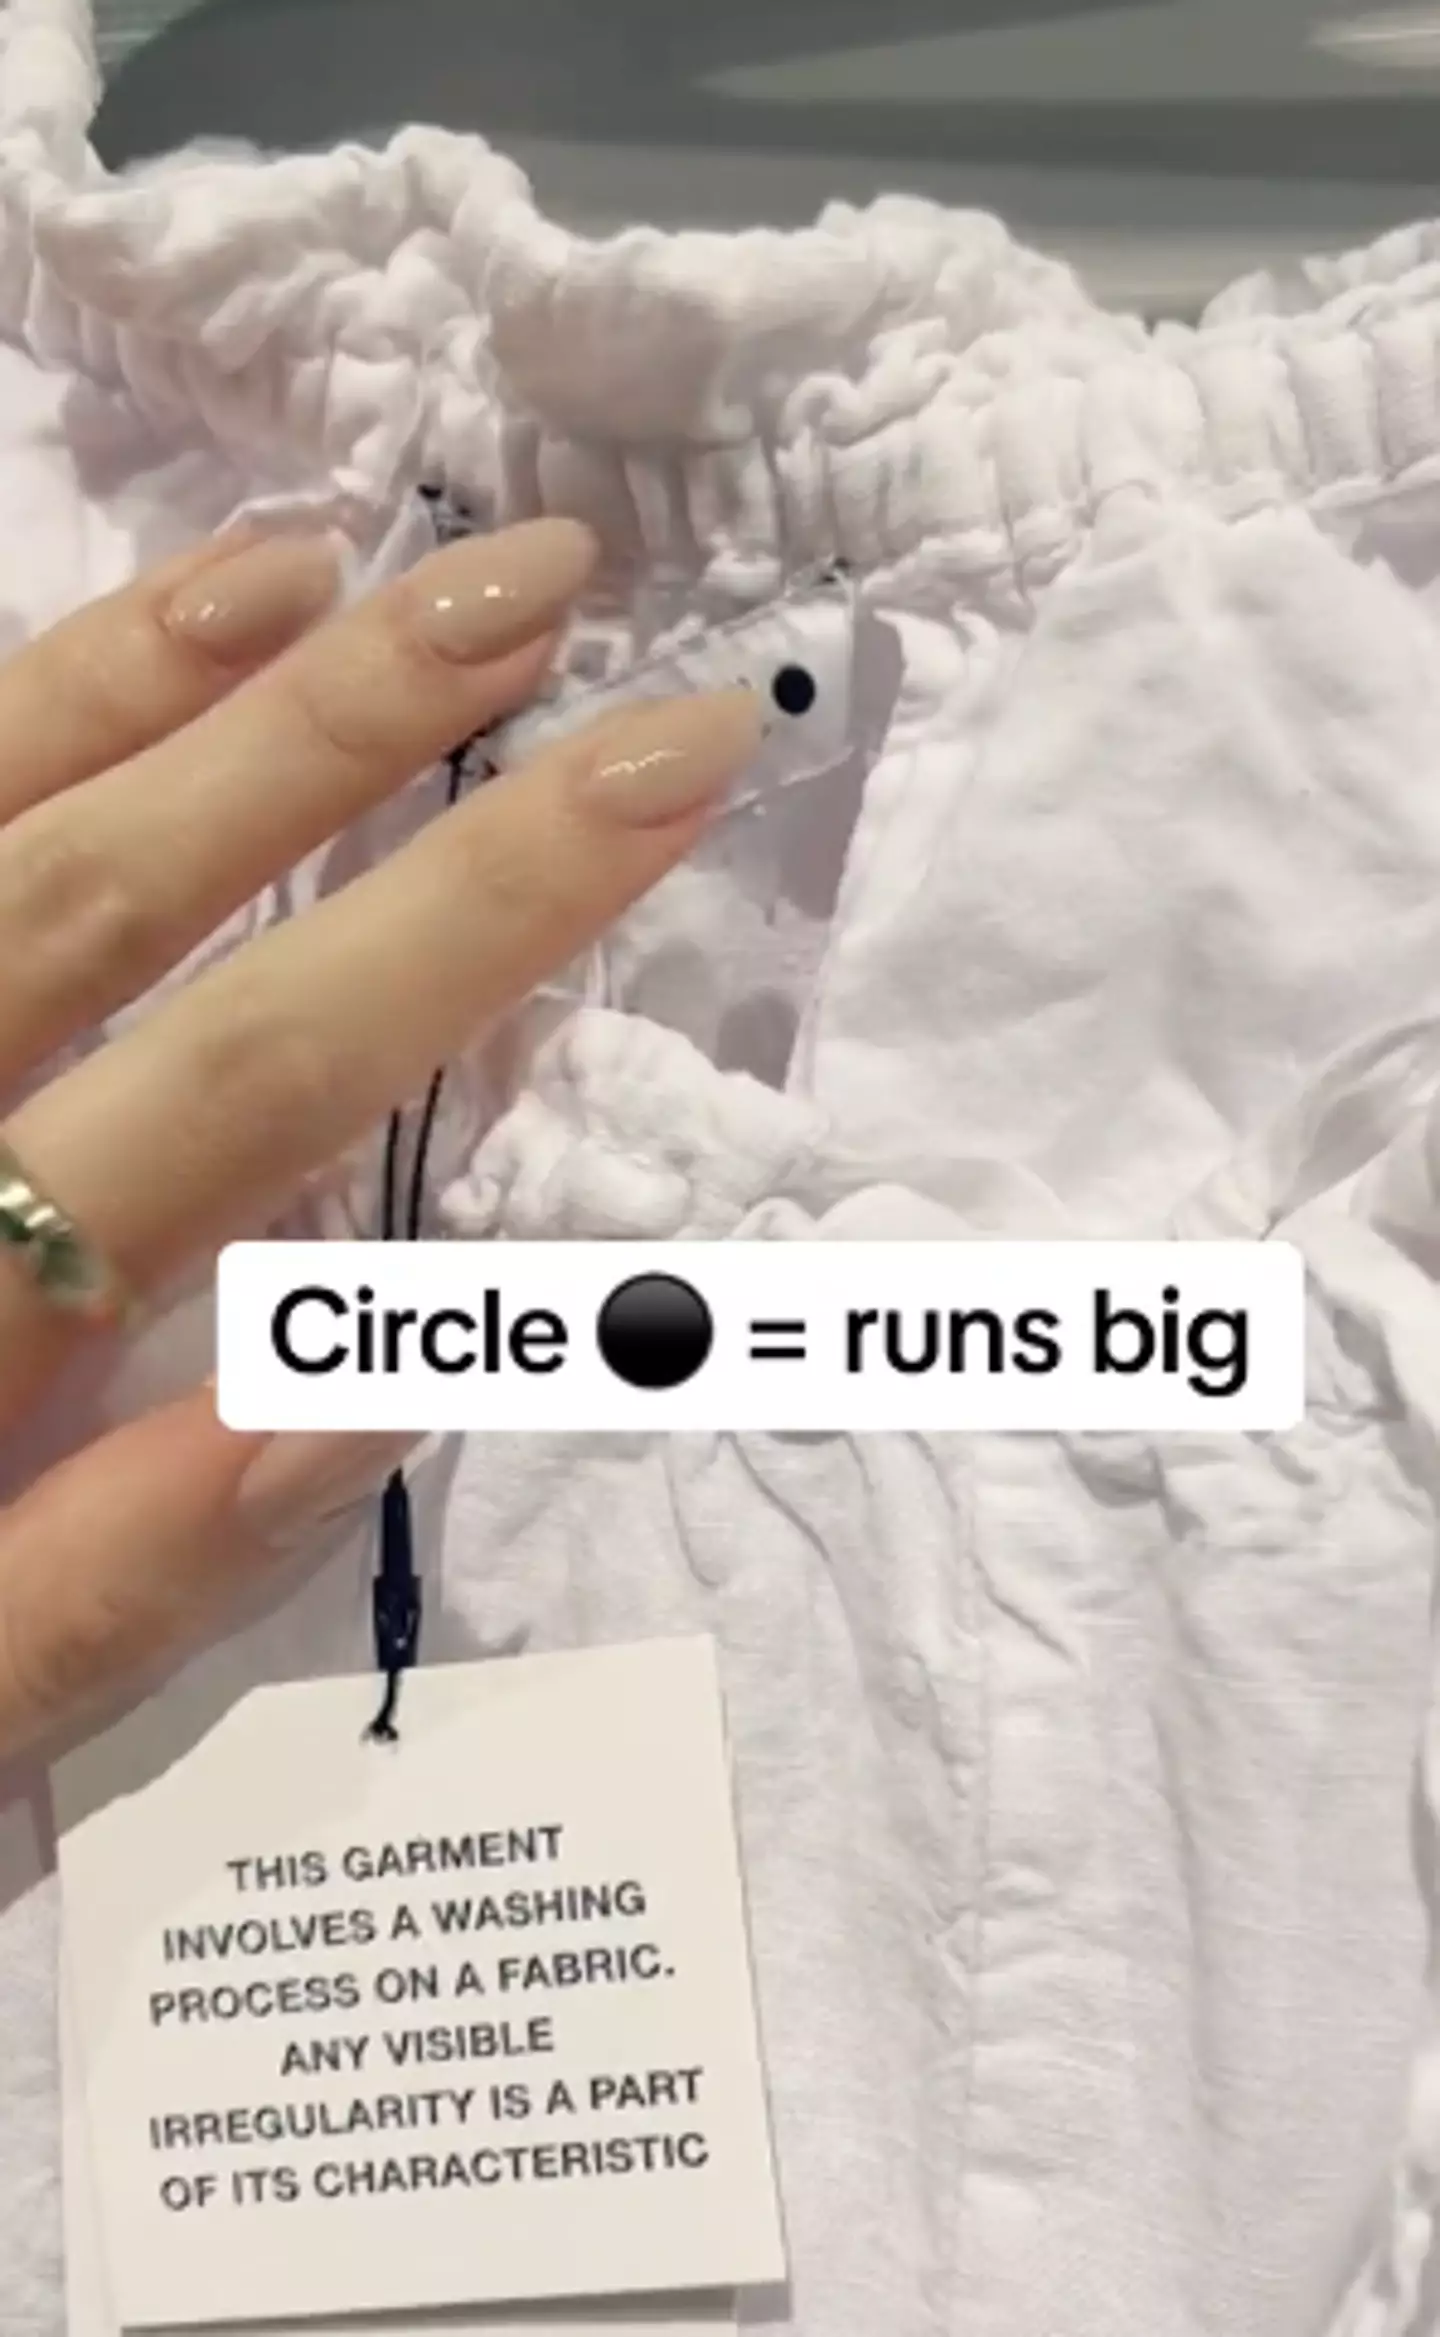 The influencer claimed the shapes are signposts for the size of the cut, which isn't true.